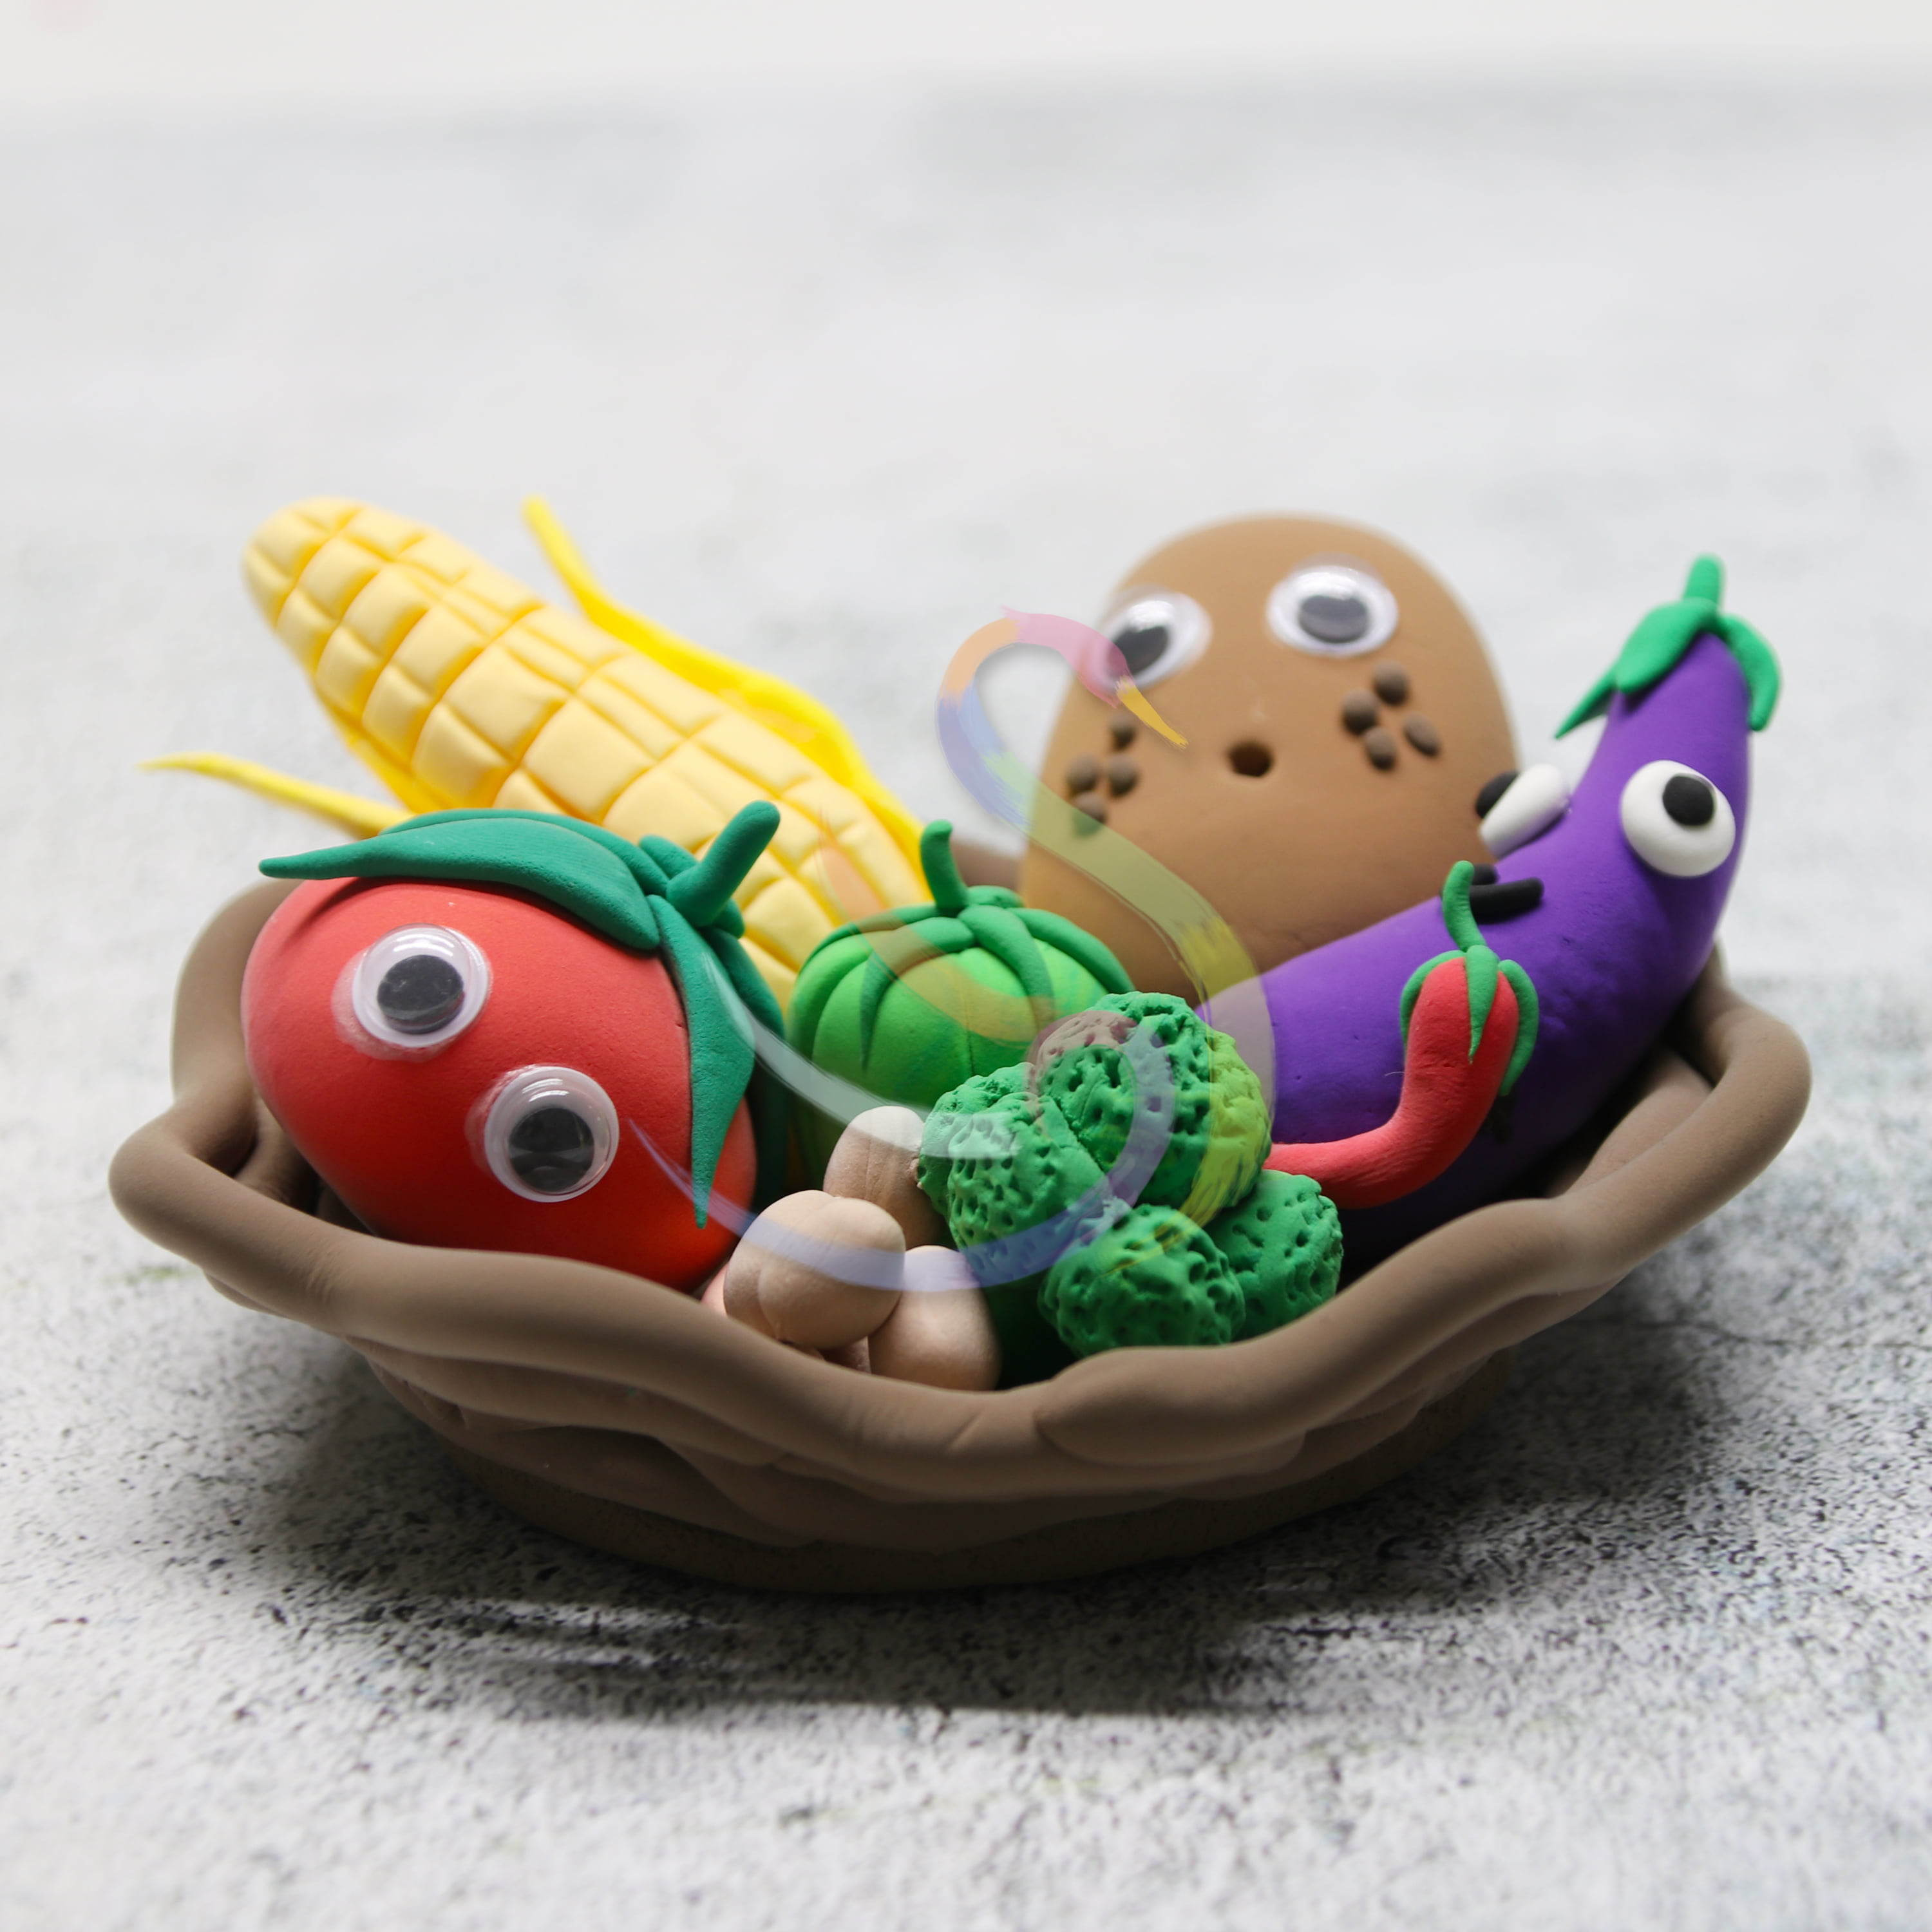 12 Grown Up Crafts For Kmart Air Dry Clay – Home and Garden